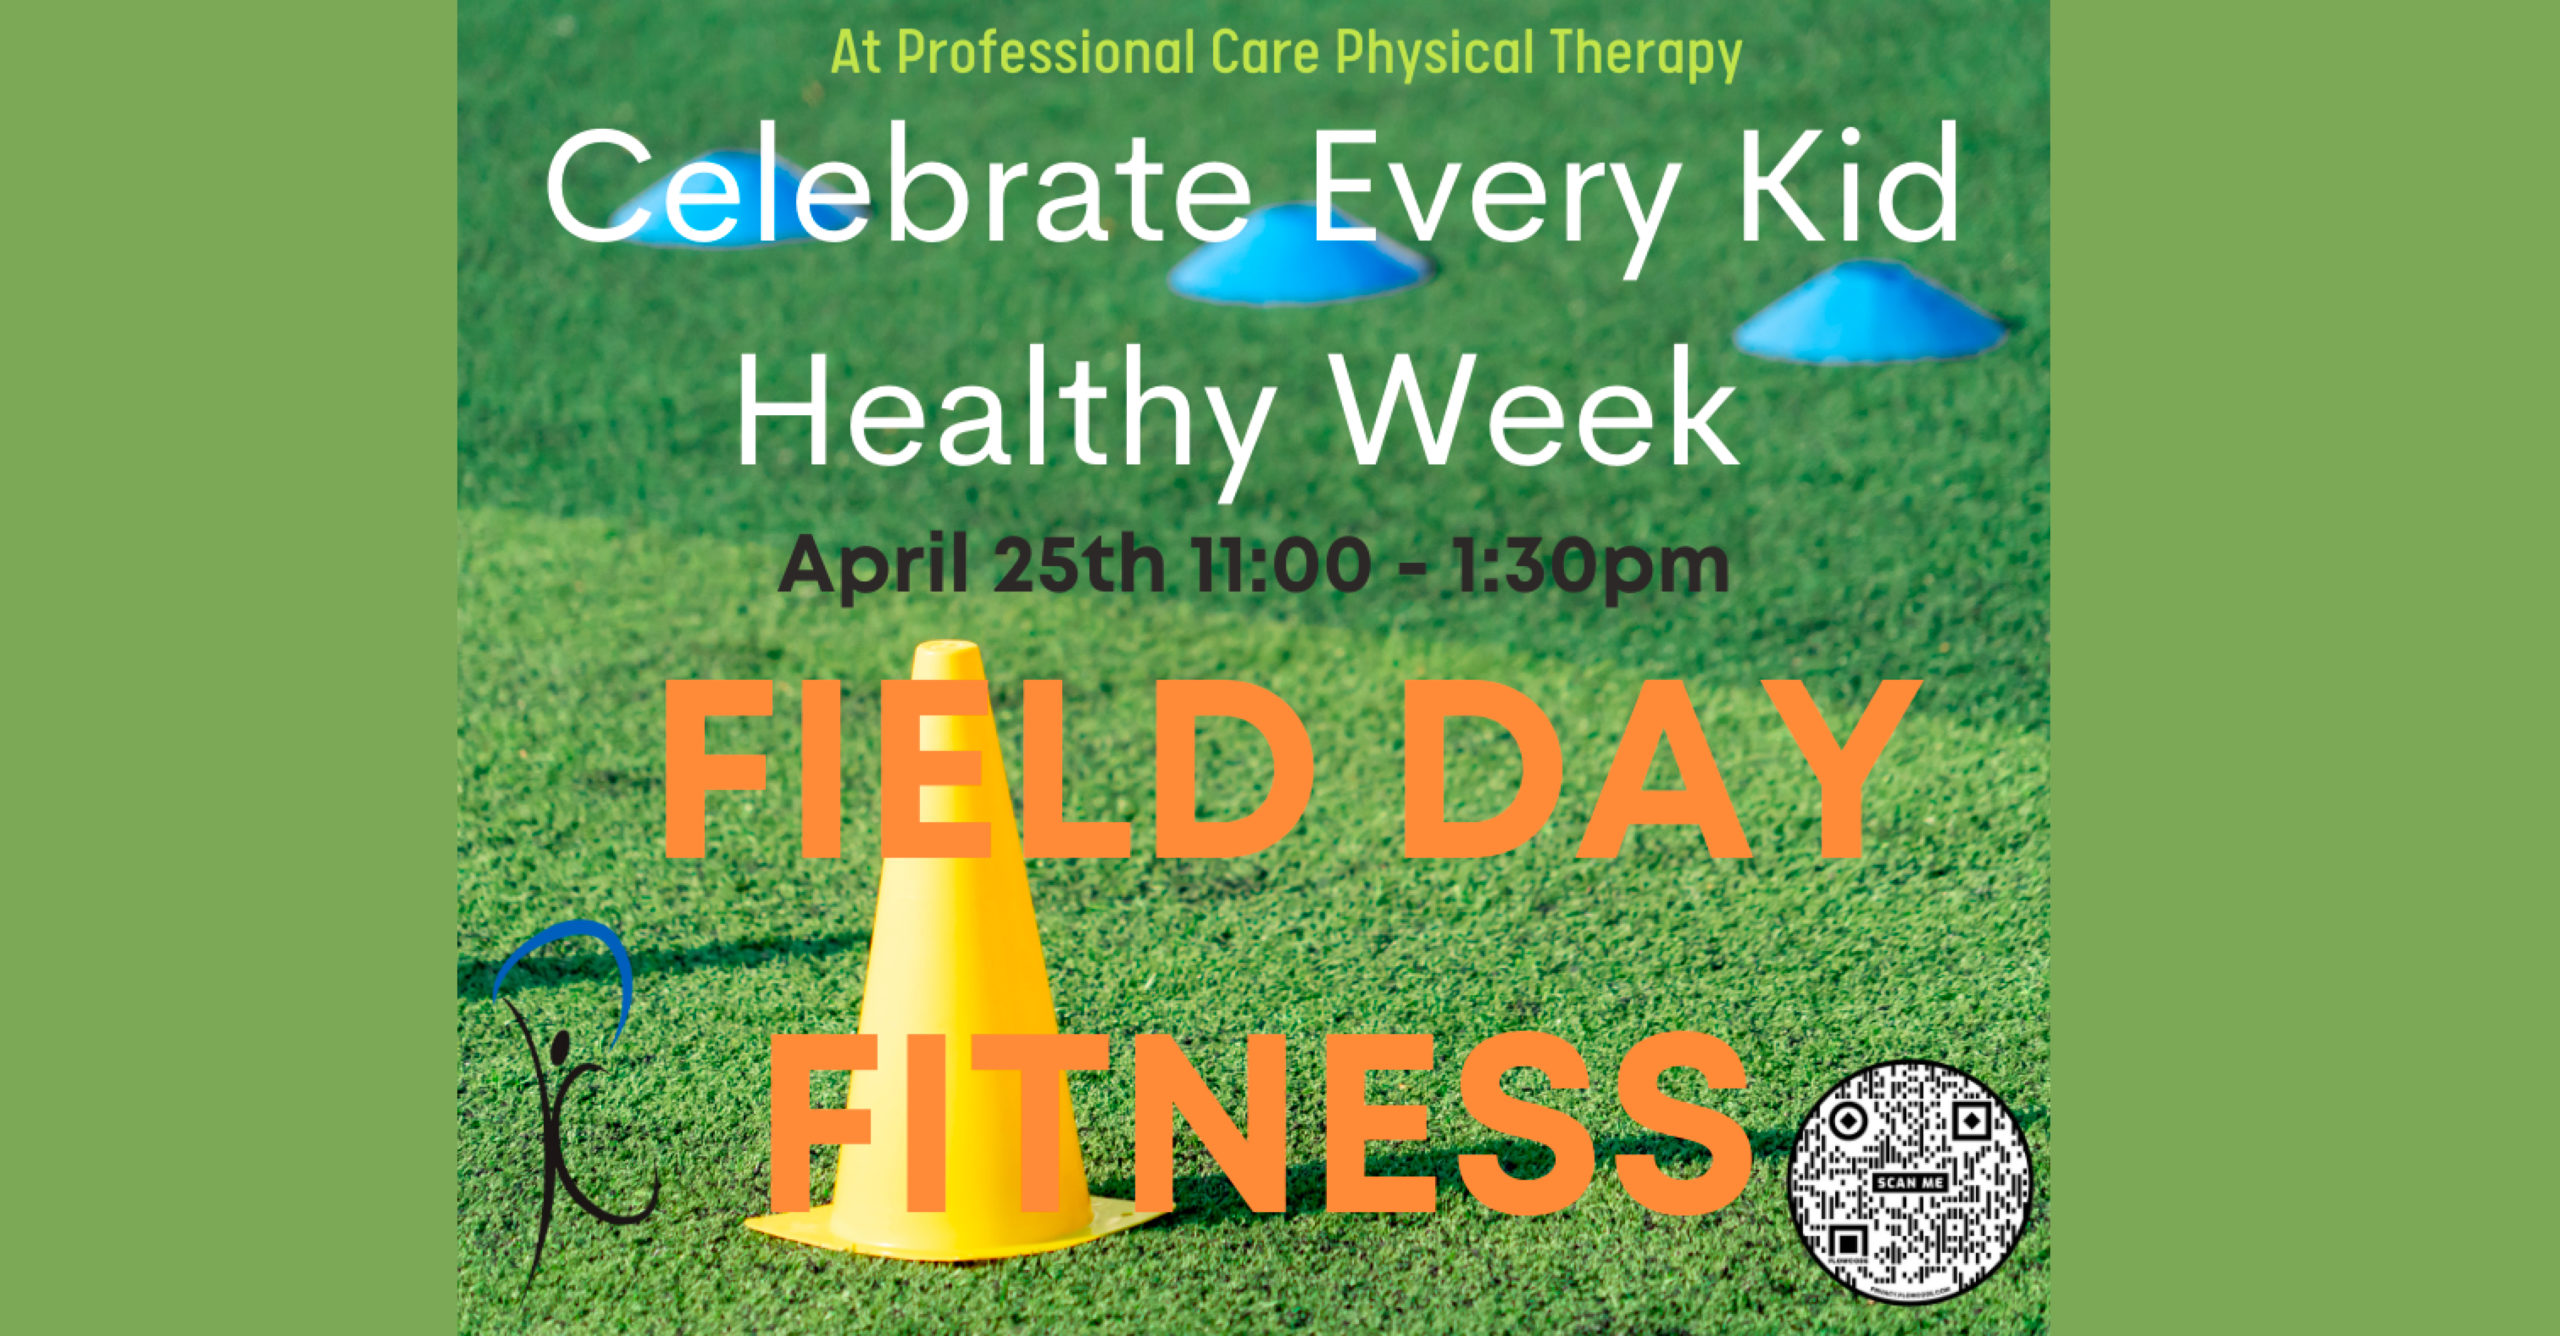 FREE Field Day Fitness at Professional Care Physical Therapy of East Patchogue